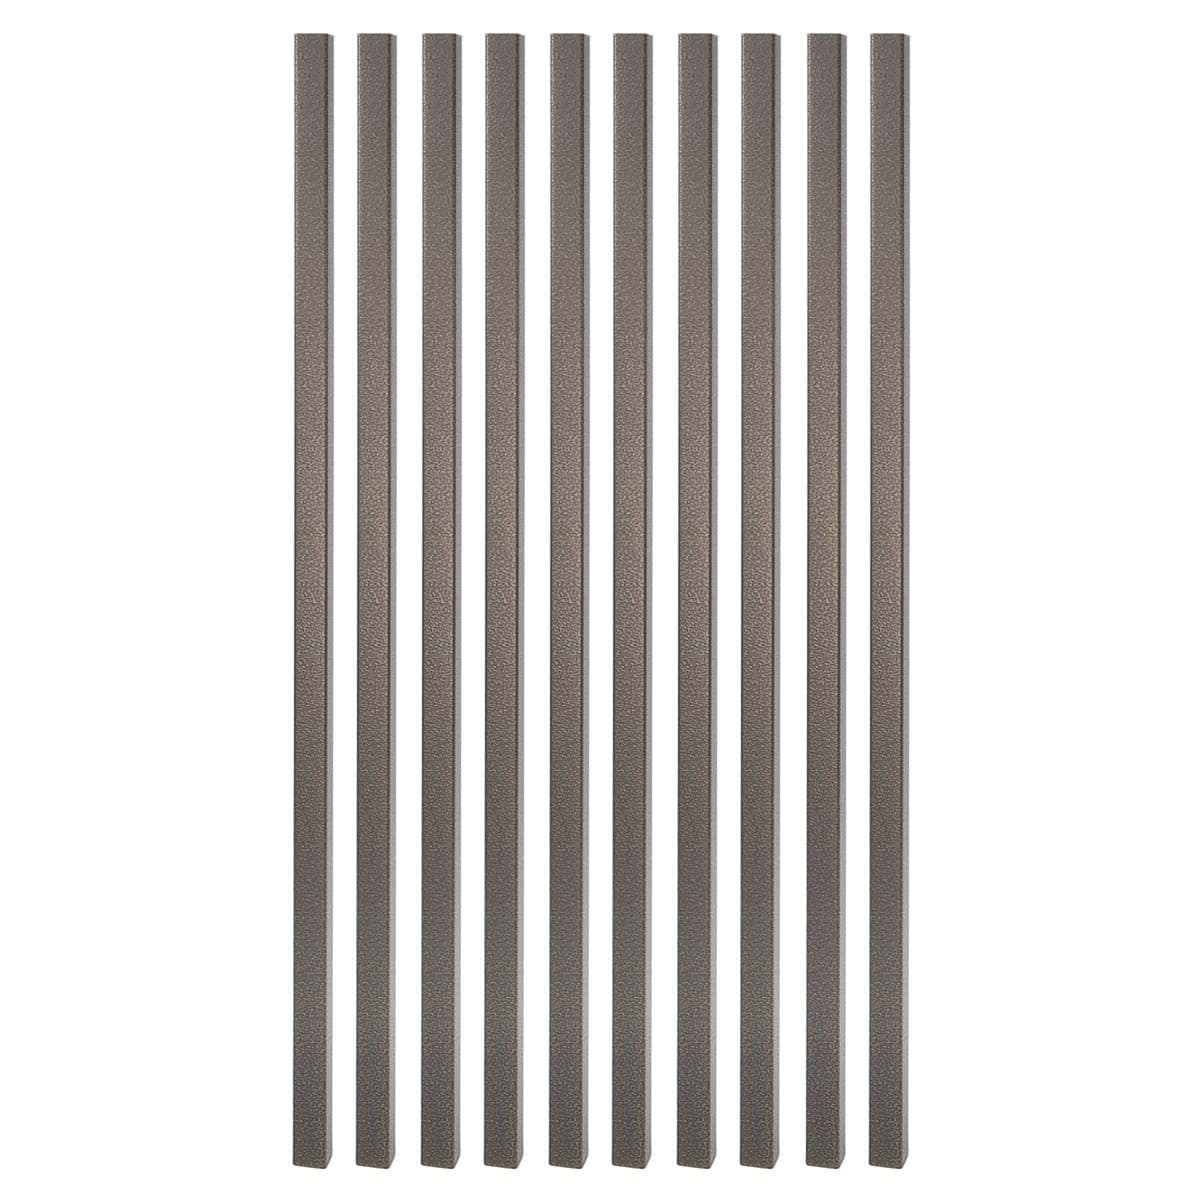 Fortress Building Products 3/4-in x 32-in Balusters Antique Bronze ...